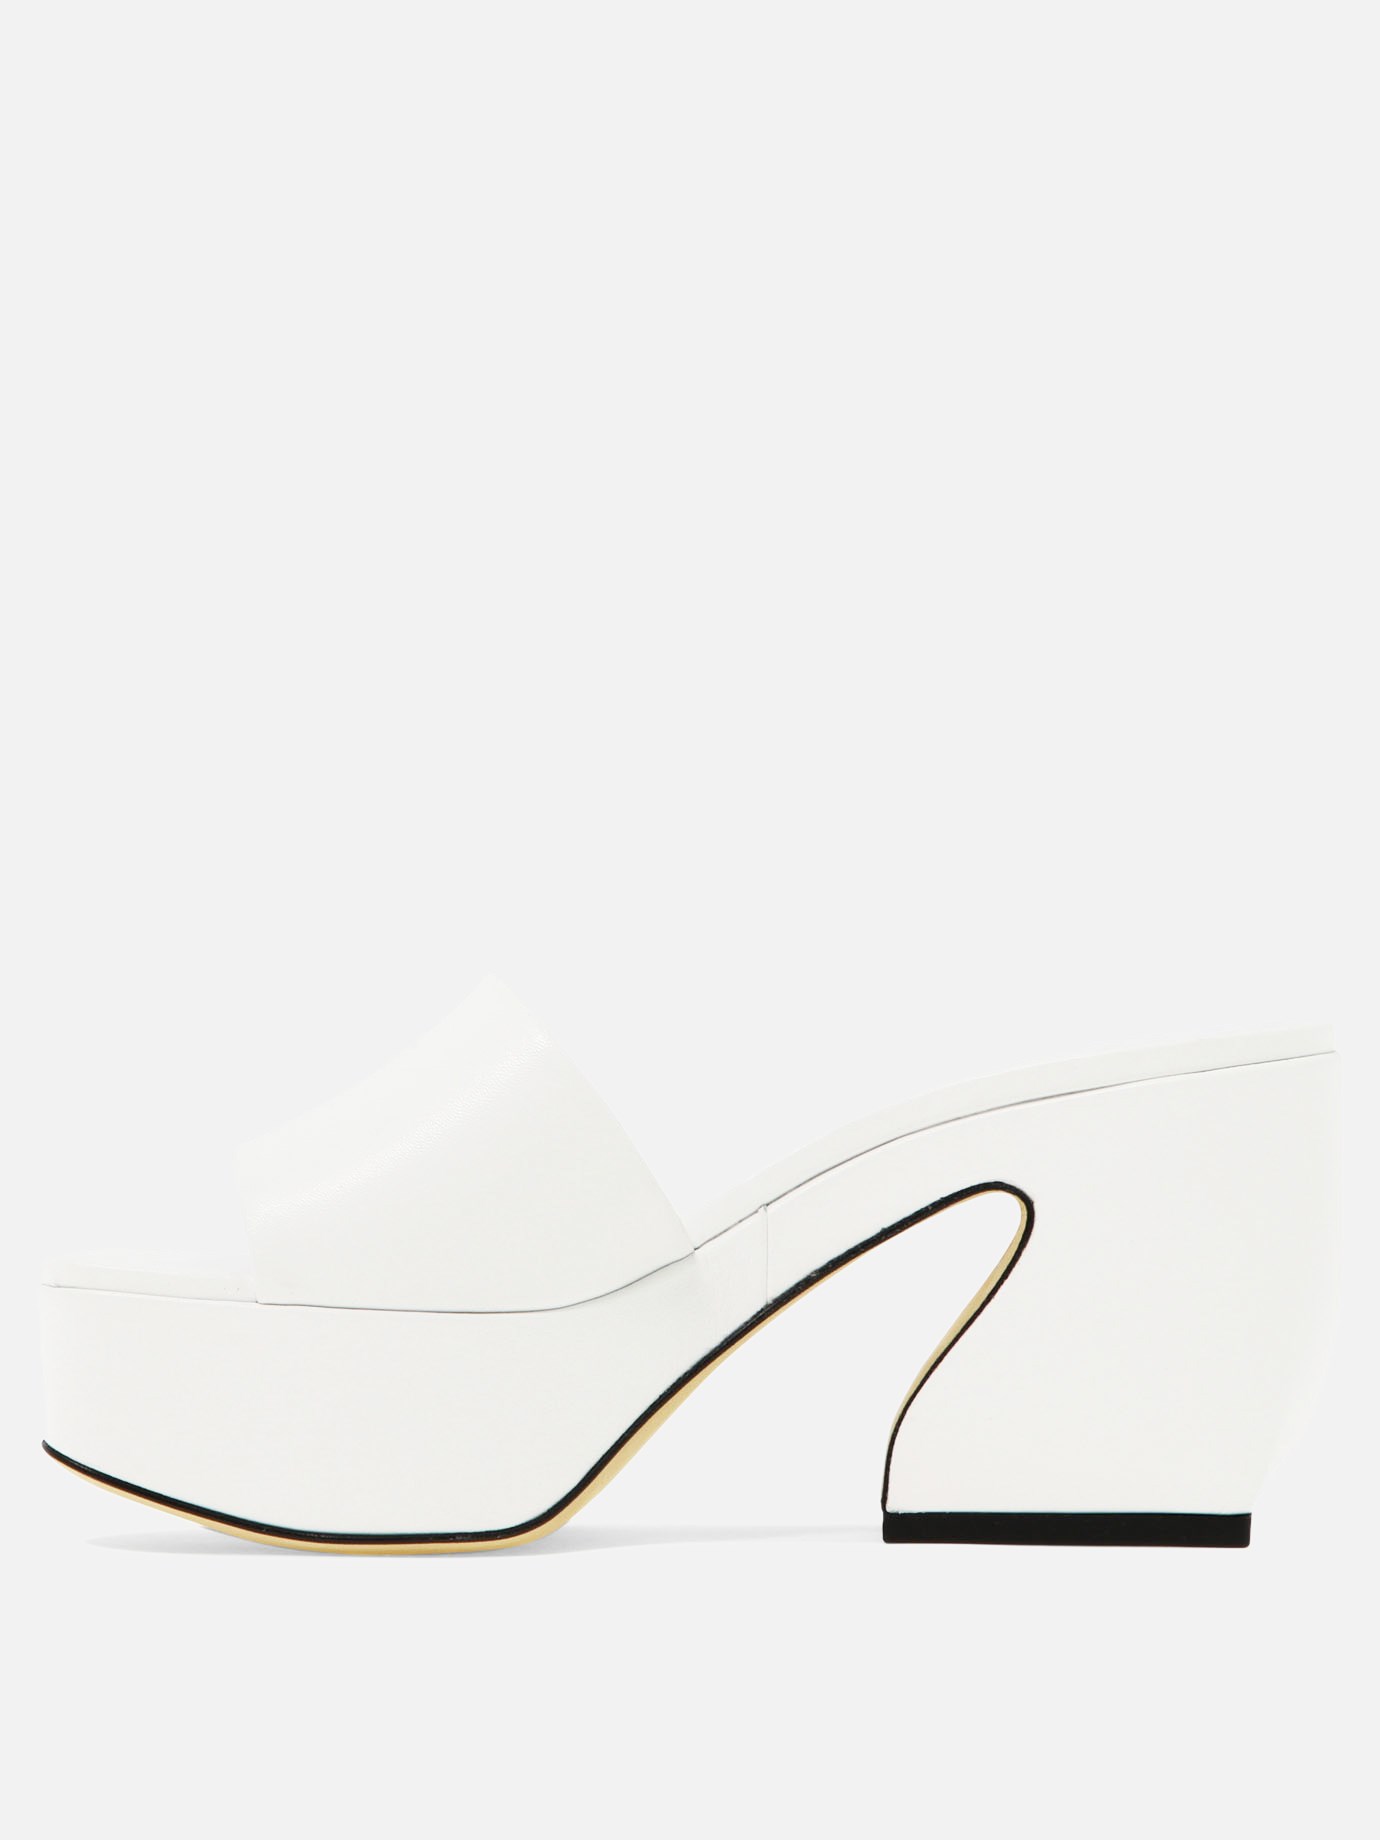 Shaped heel sandals by Si Rossi